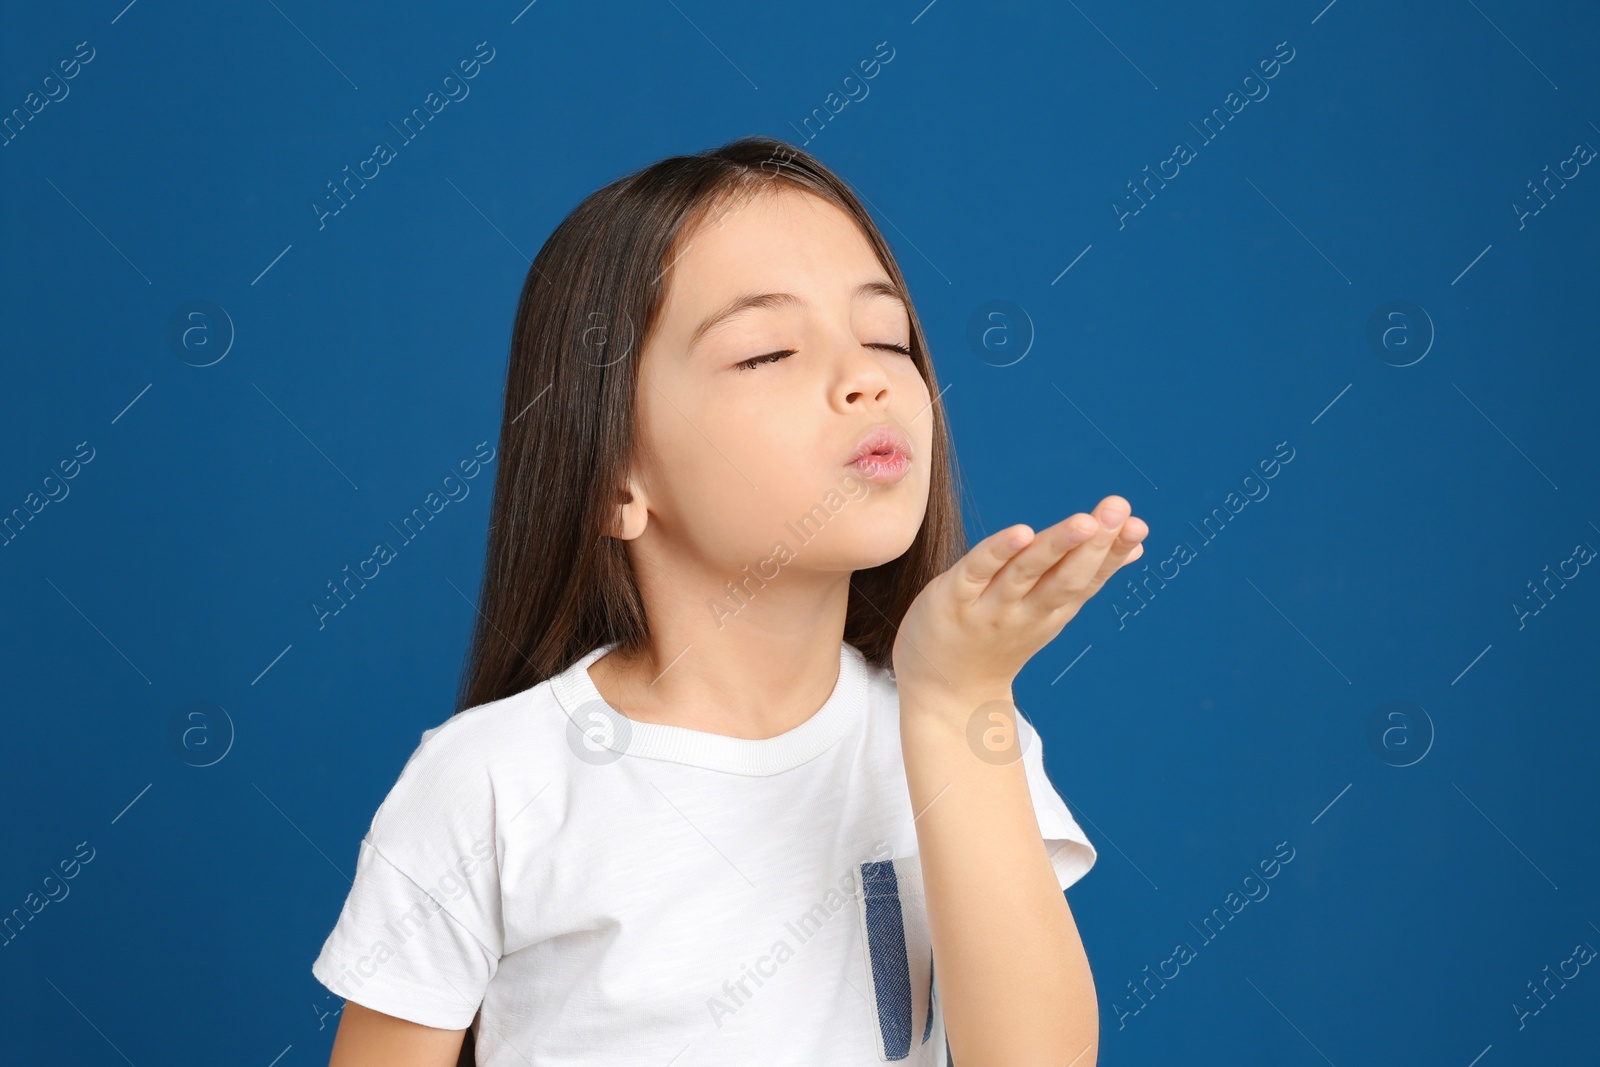 Photo of Cute little girl blowing kiss on blue background